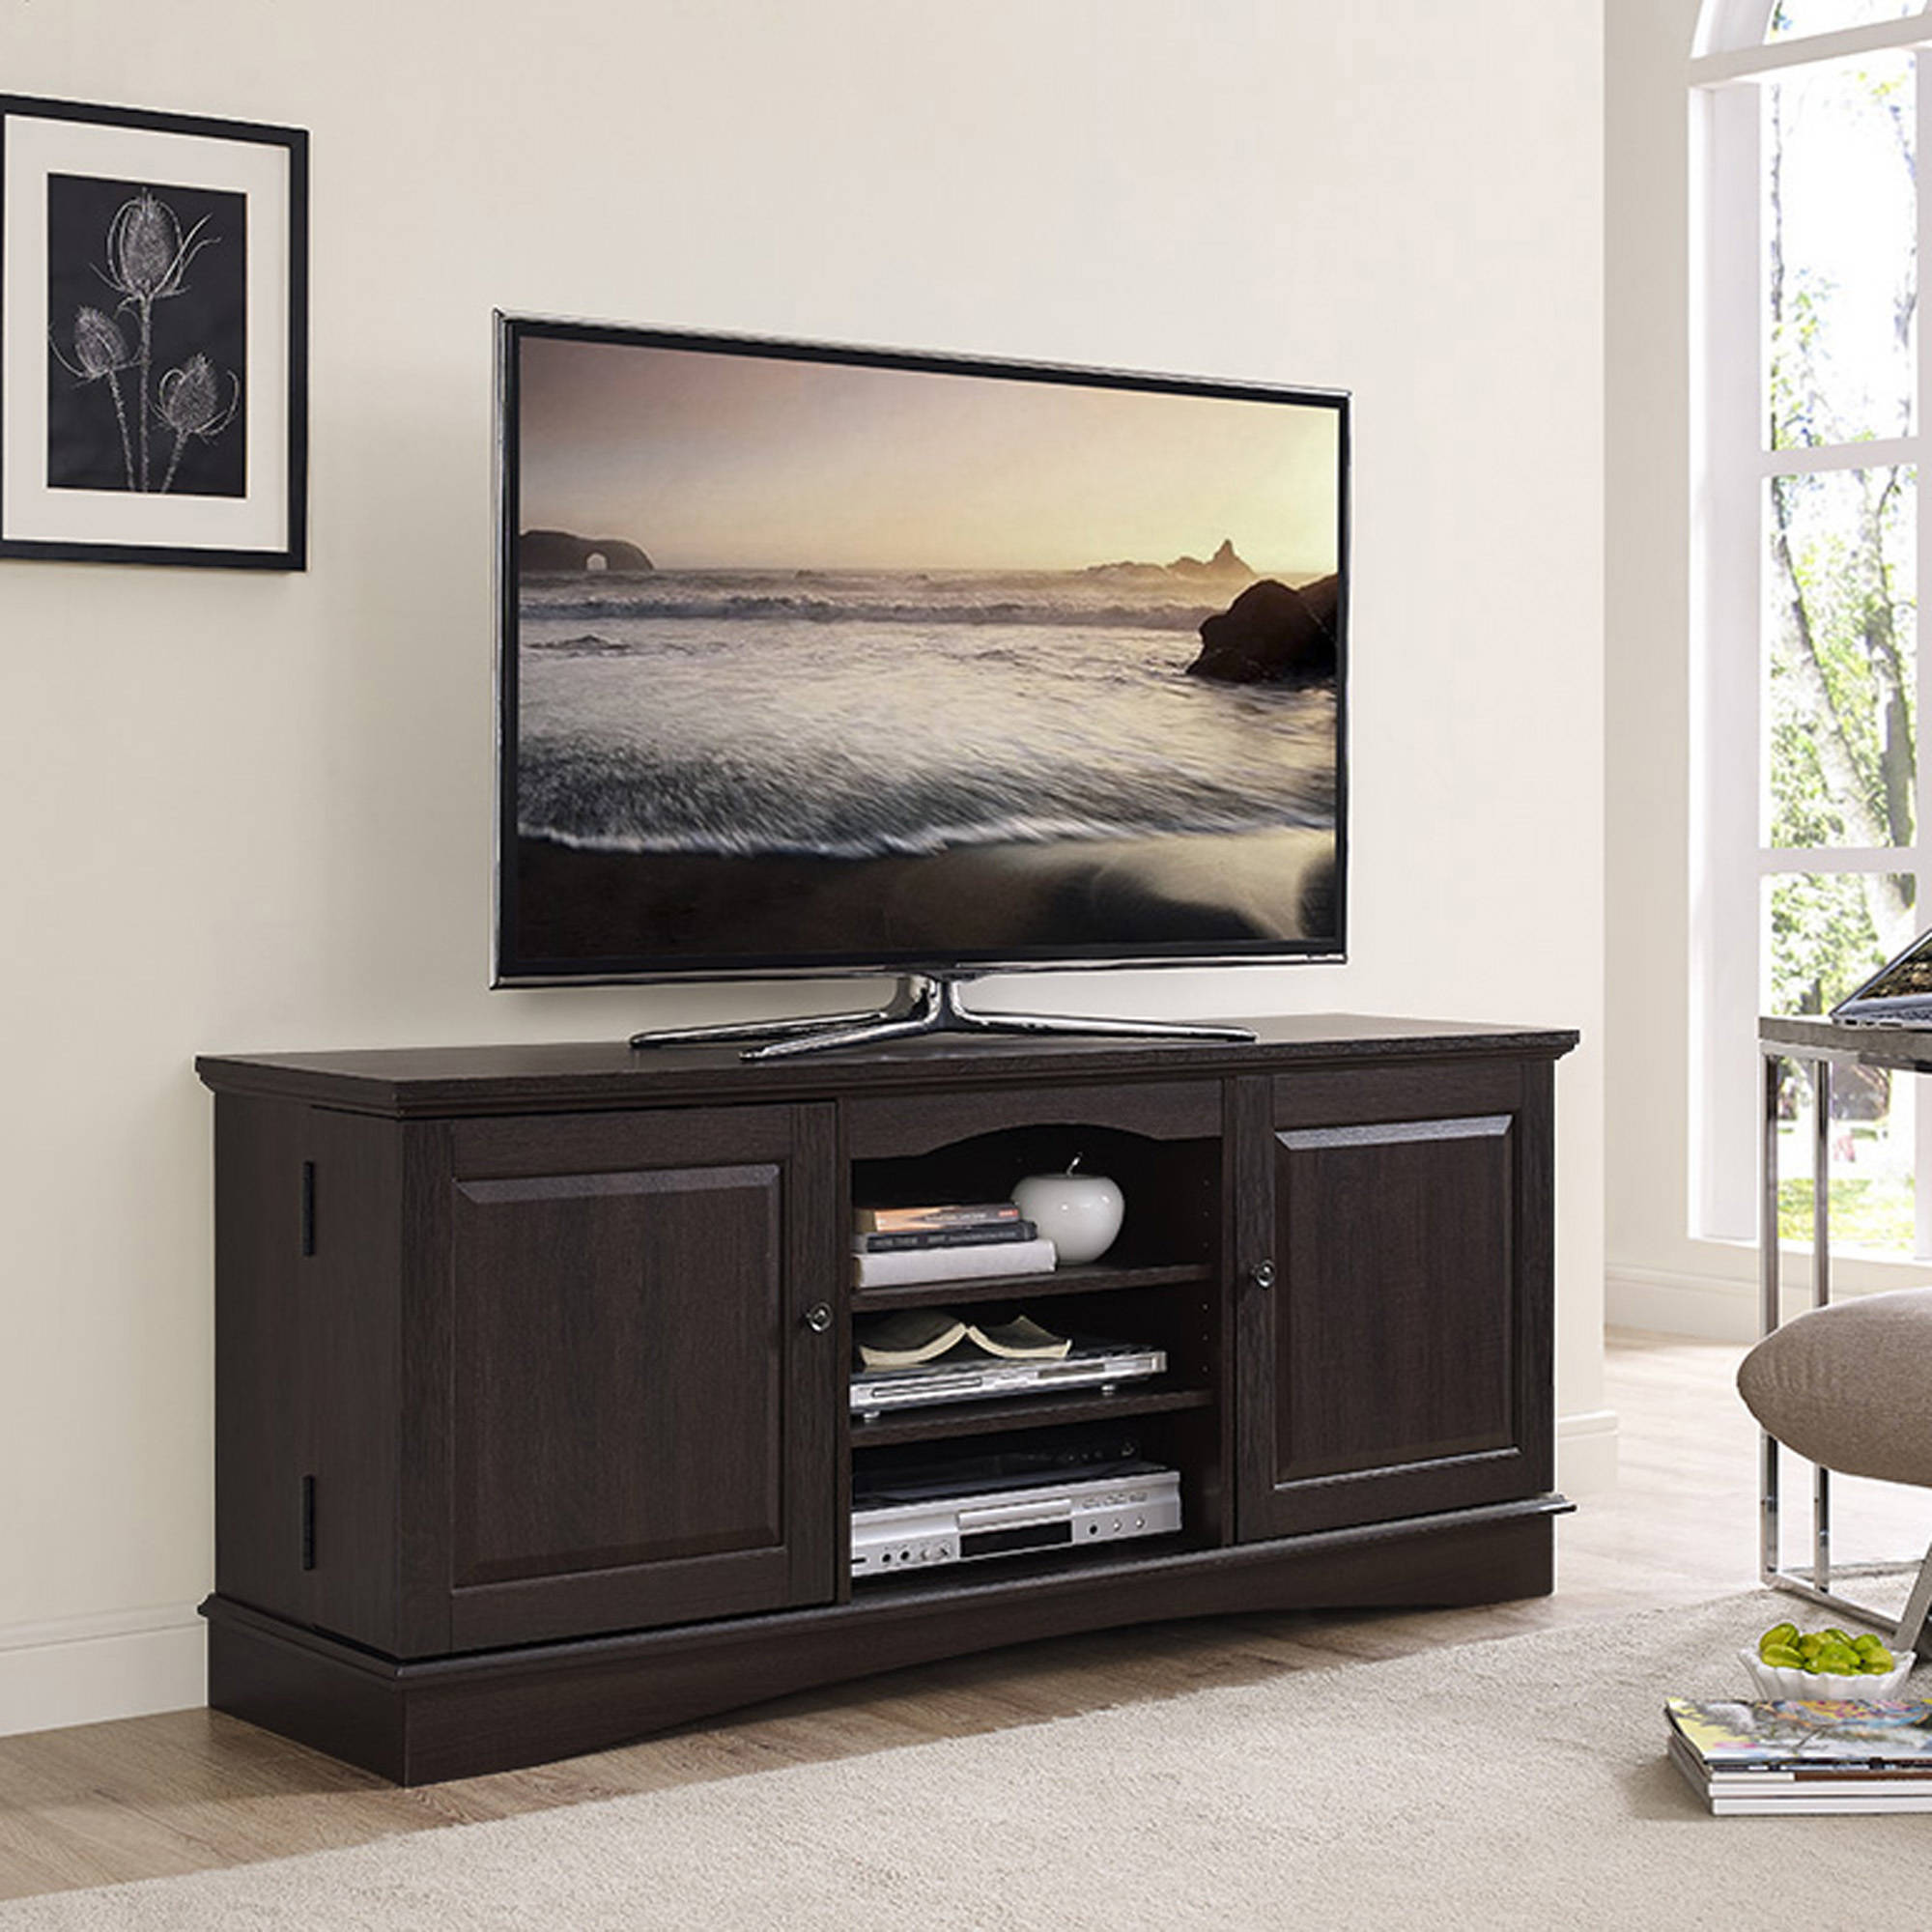 Target Fireplace Tv Stand Beautiful Console Designs Wood Consoles Woods Suspended Rustic for